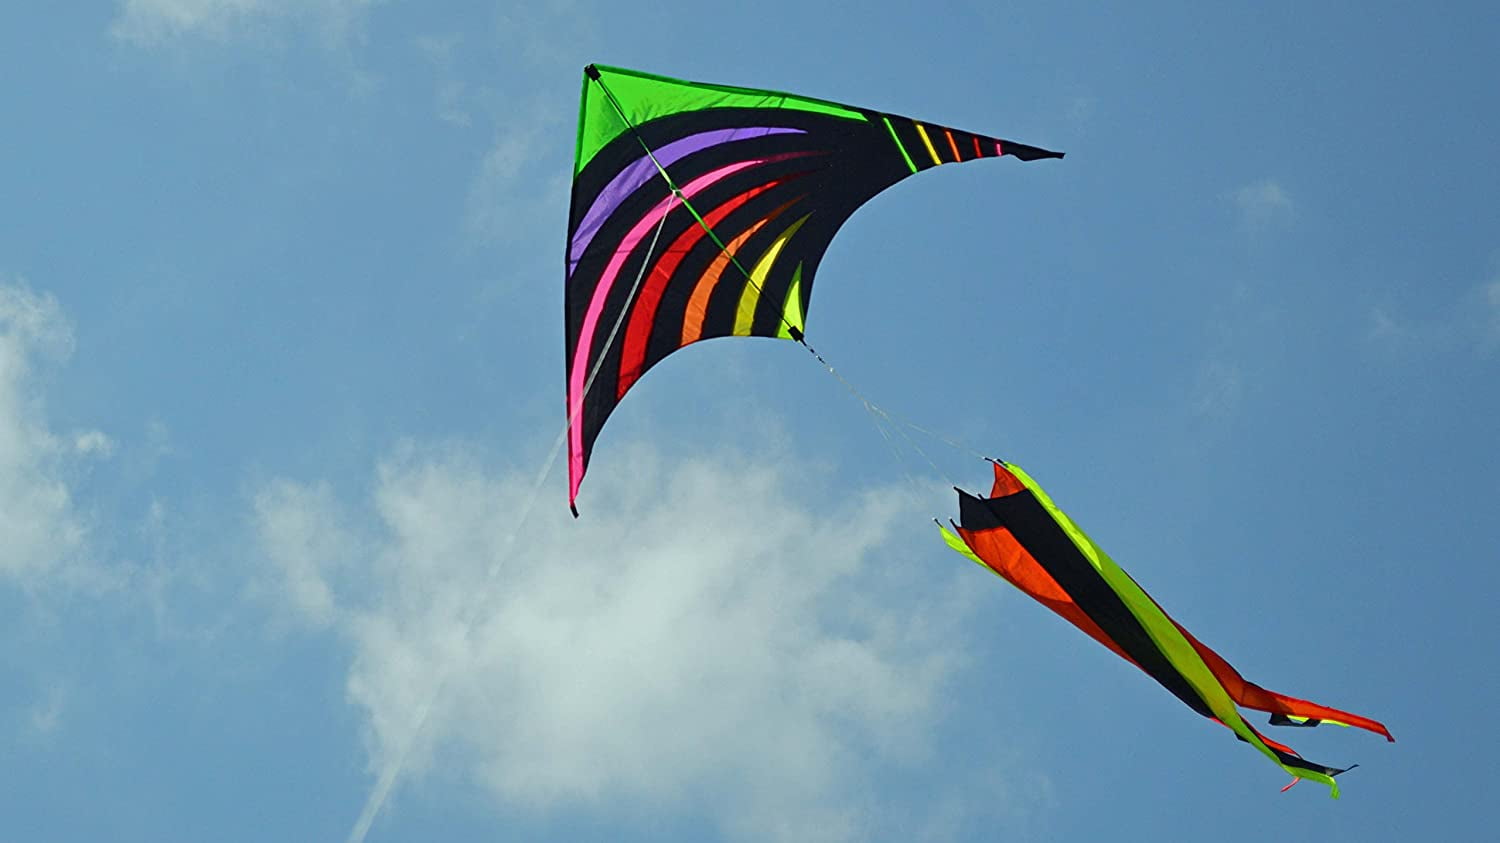 kizh Kite Rainbow Dual Line Kites Easy Flyer Kite for Beach Park Garden for Adults 55 Inch with Two Free Kite String Line Board